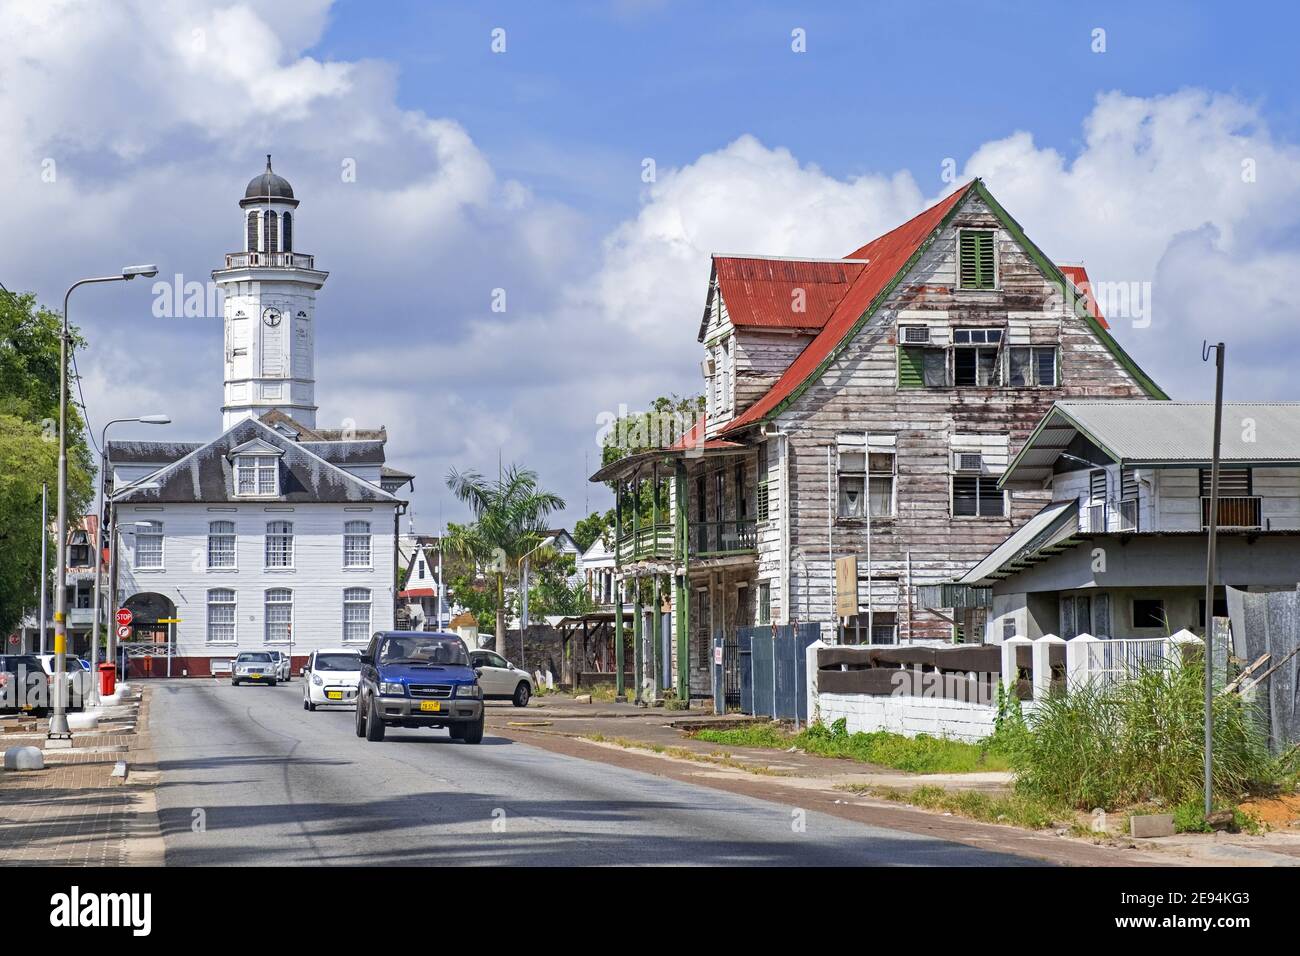 White wooden clock tower of the Ministry of Finance building and colonial houses in the city centre of Paramaribo, Suriname / Surinam Stock Photo